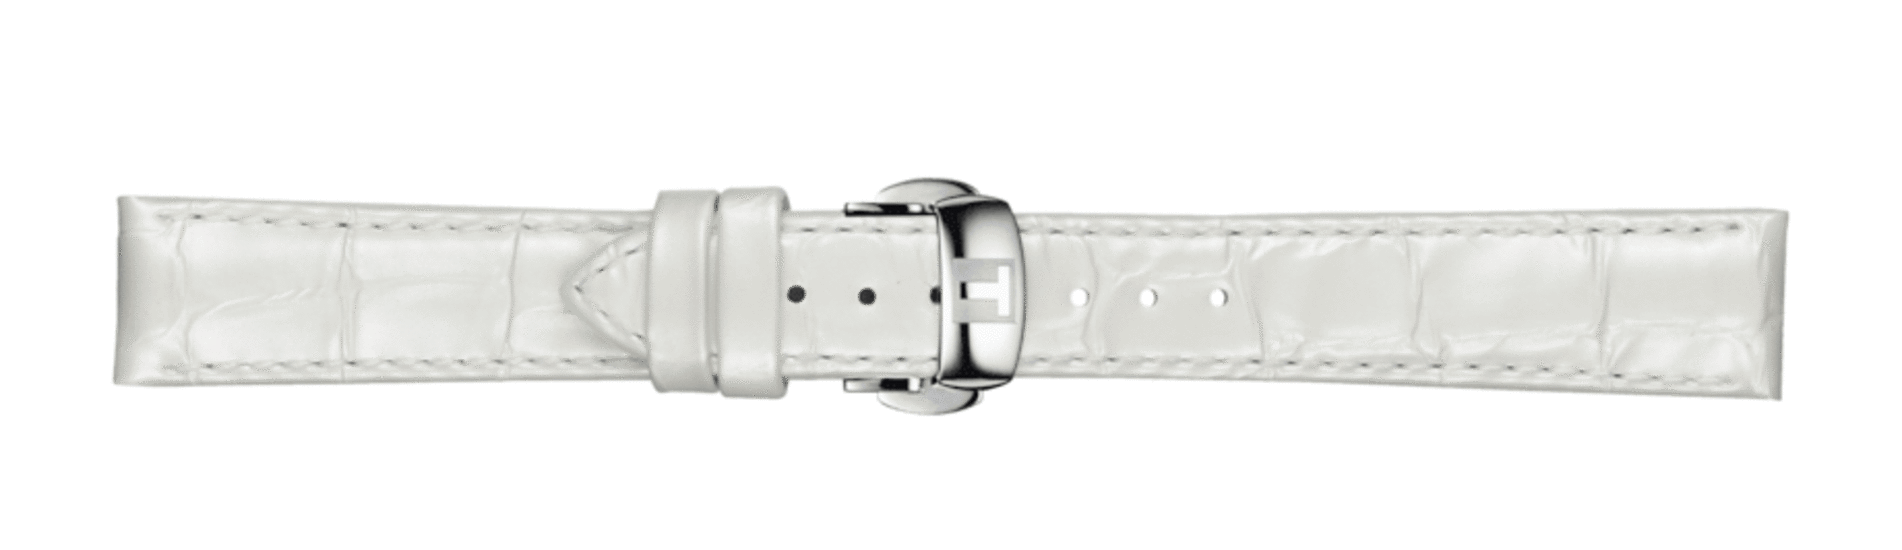 TISSOT OFFICIAL WHITE LEATHER STRAP LUGS 16 MM T852.036.795